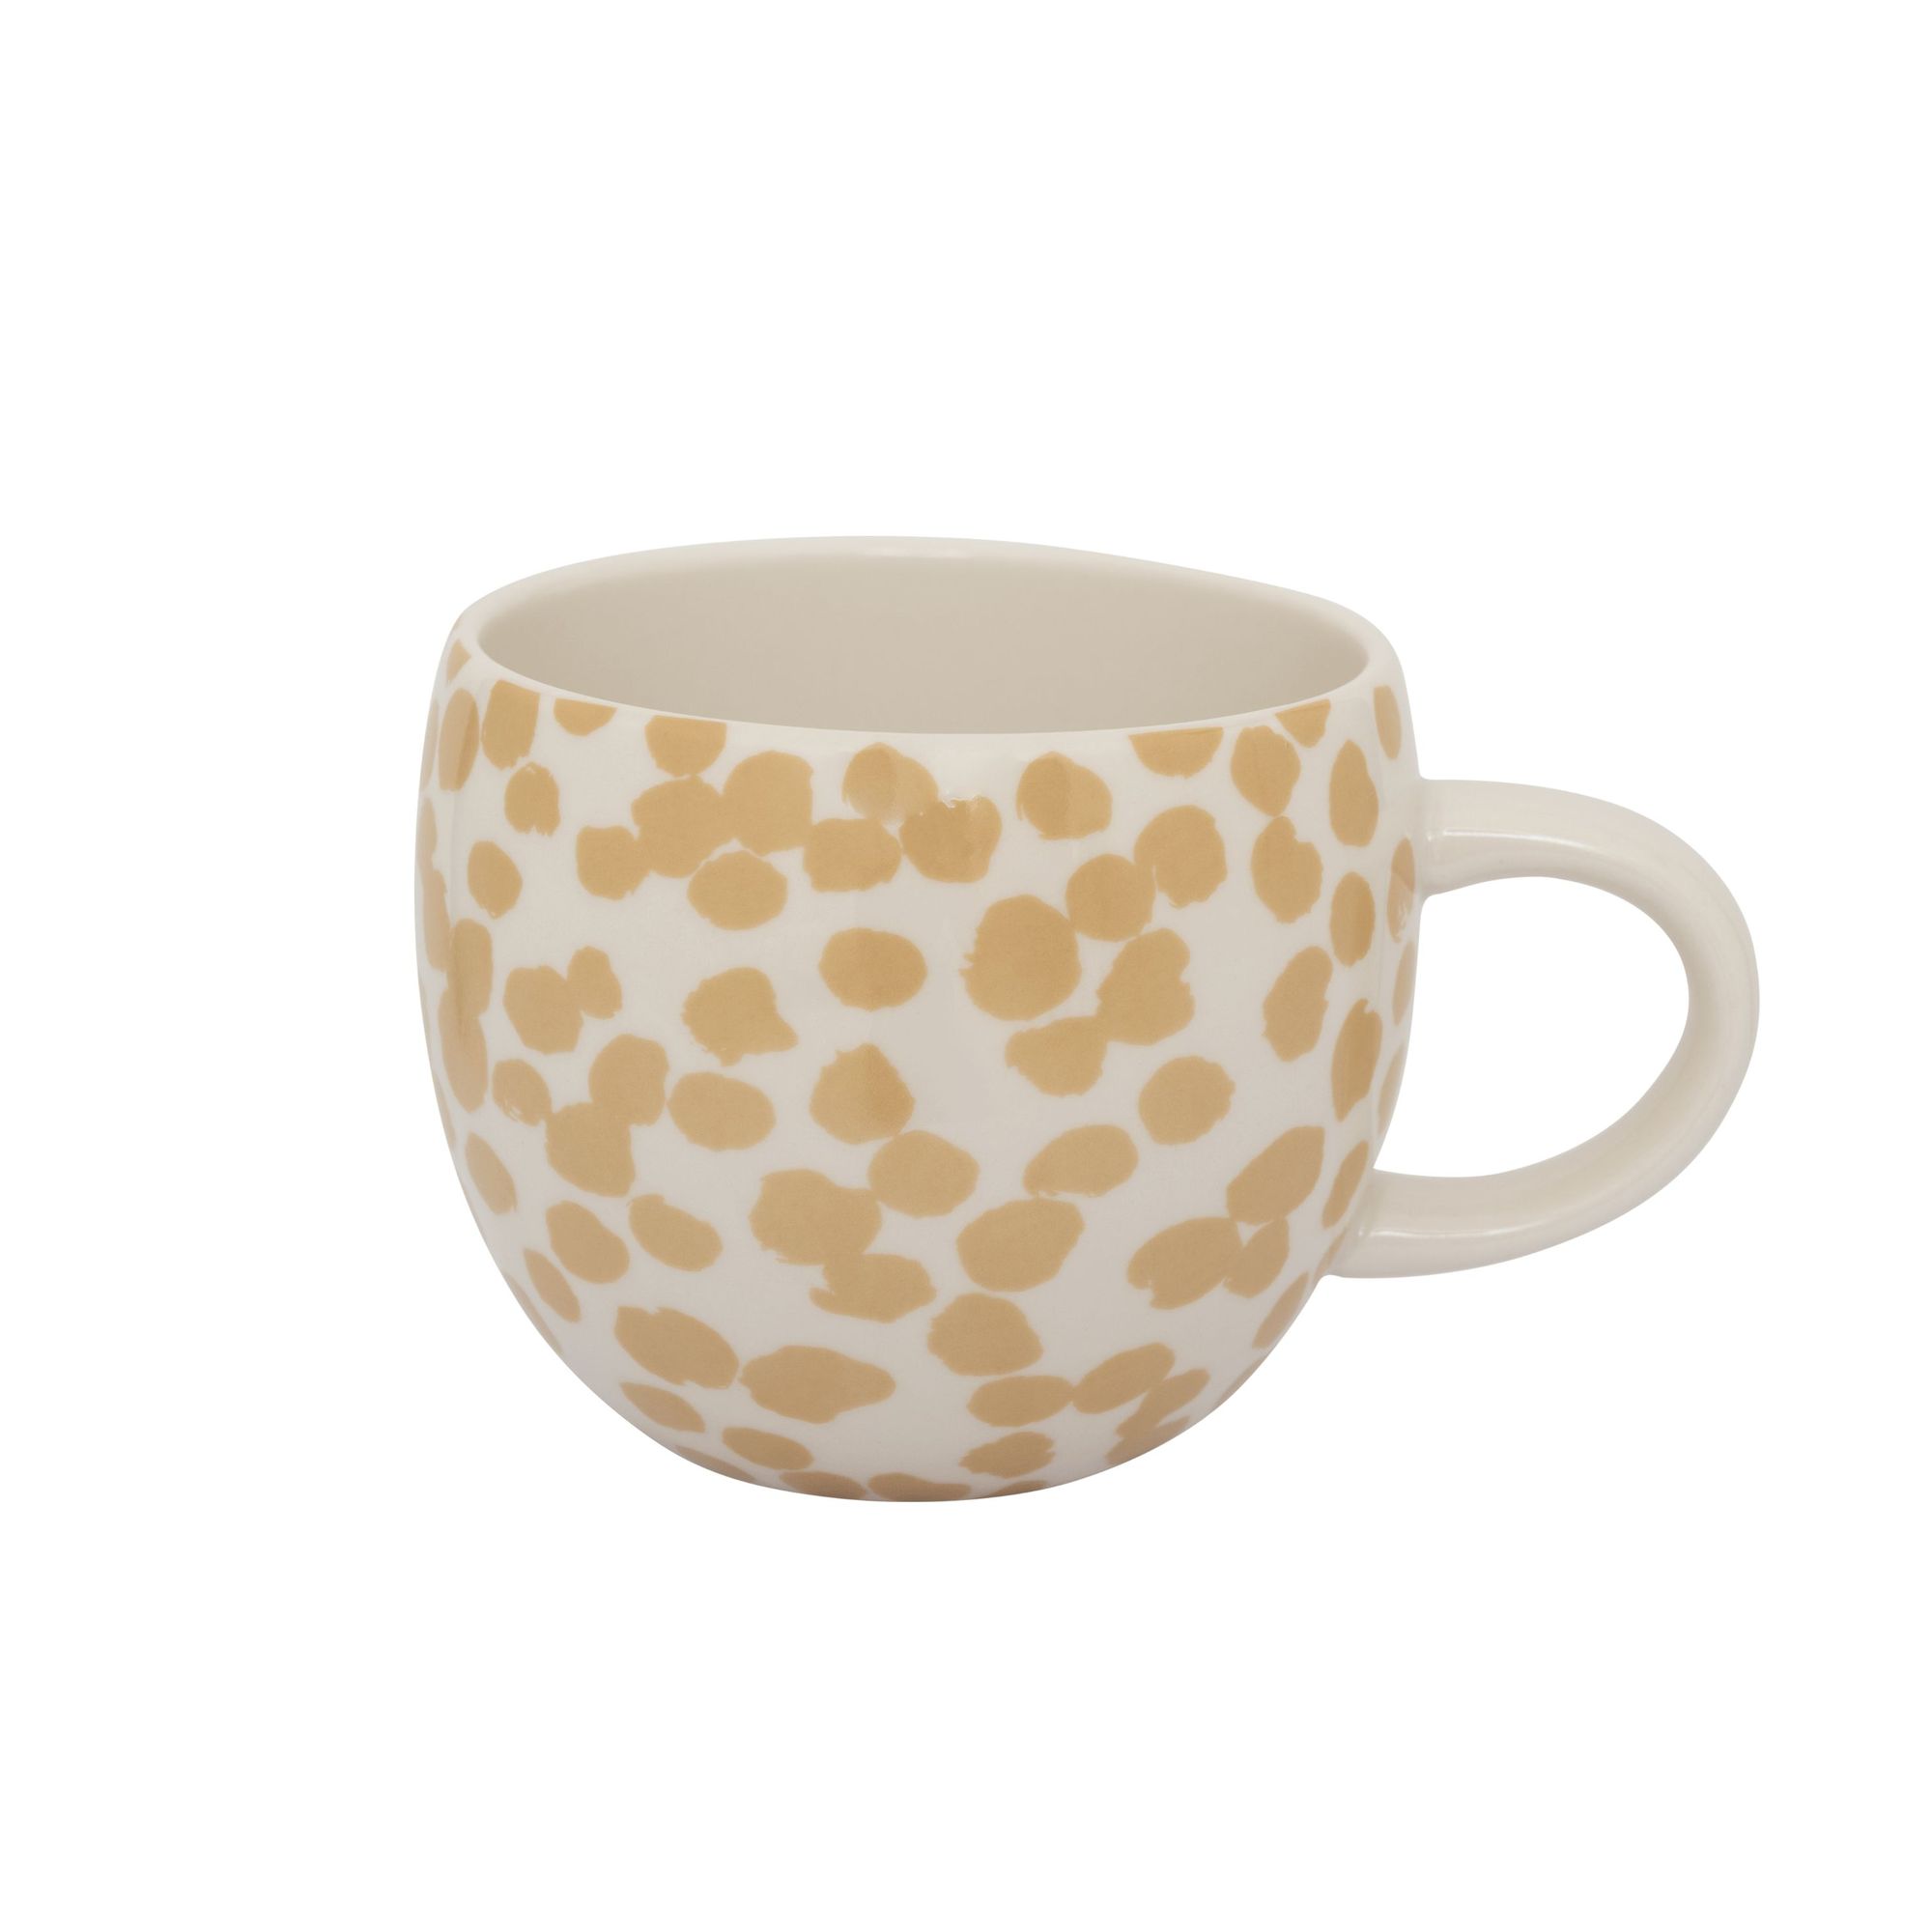 Unc Good Evening Cup Whirling Dots Gift